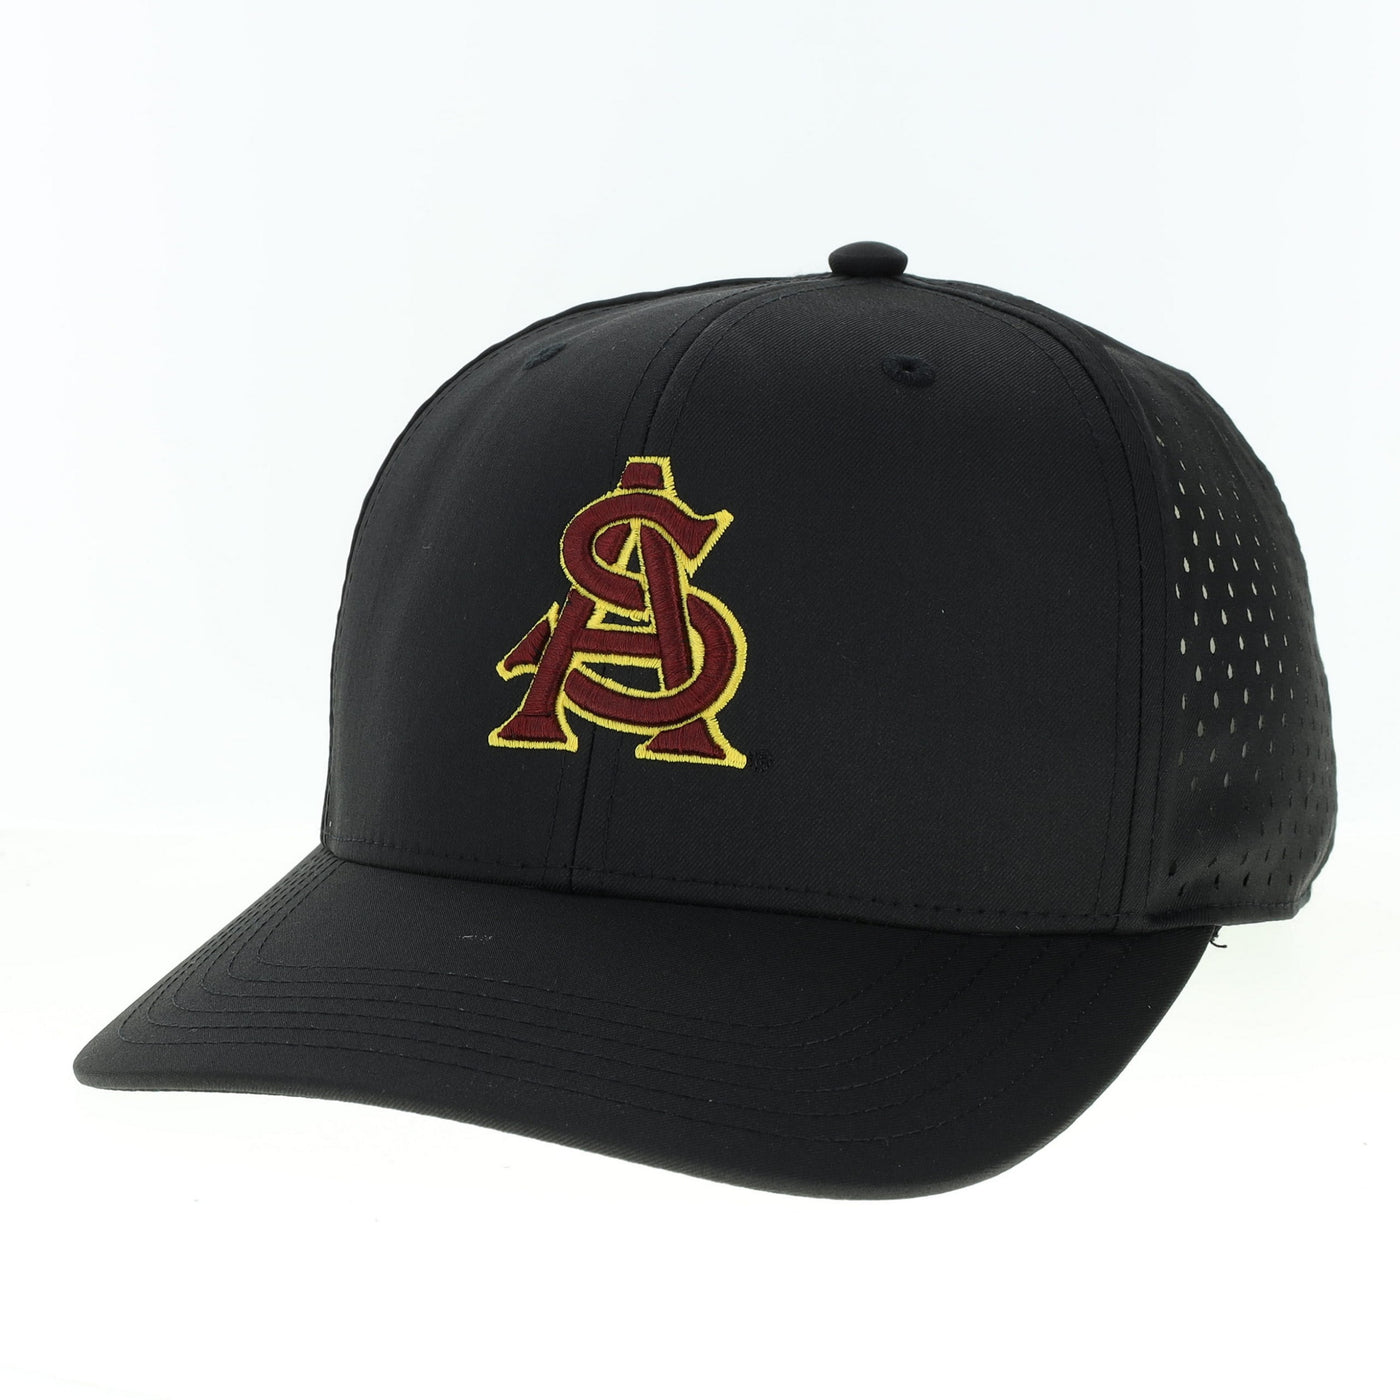 ASU black hat with mesh on the backside and the interlocking a&s logo on the front in maroon outlined in gold.